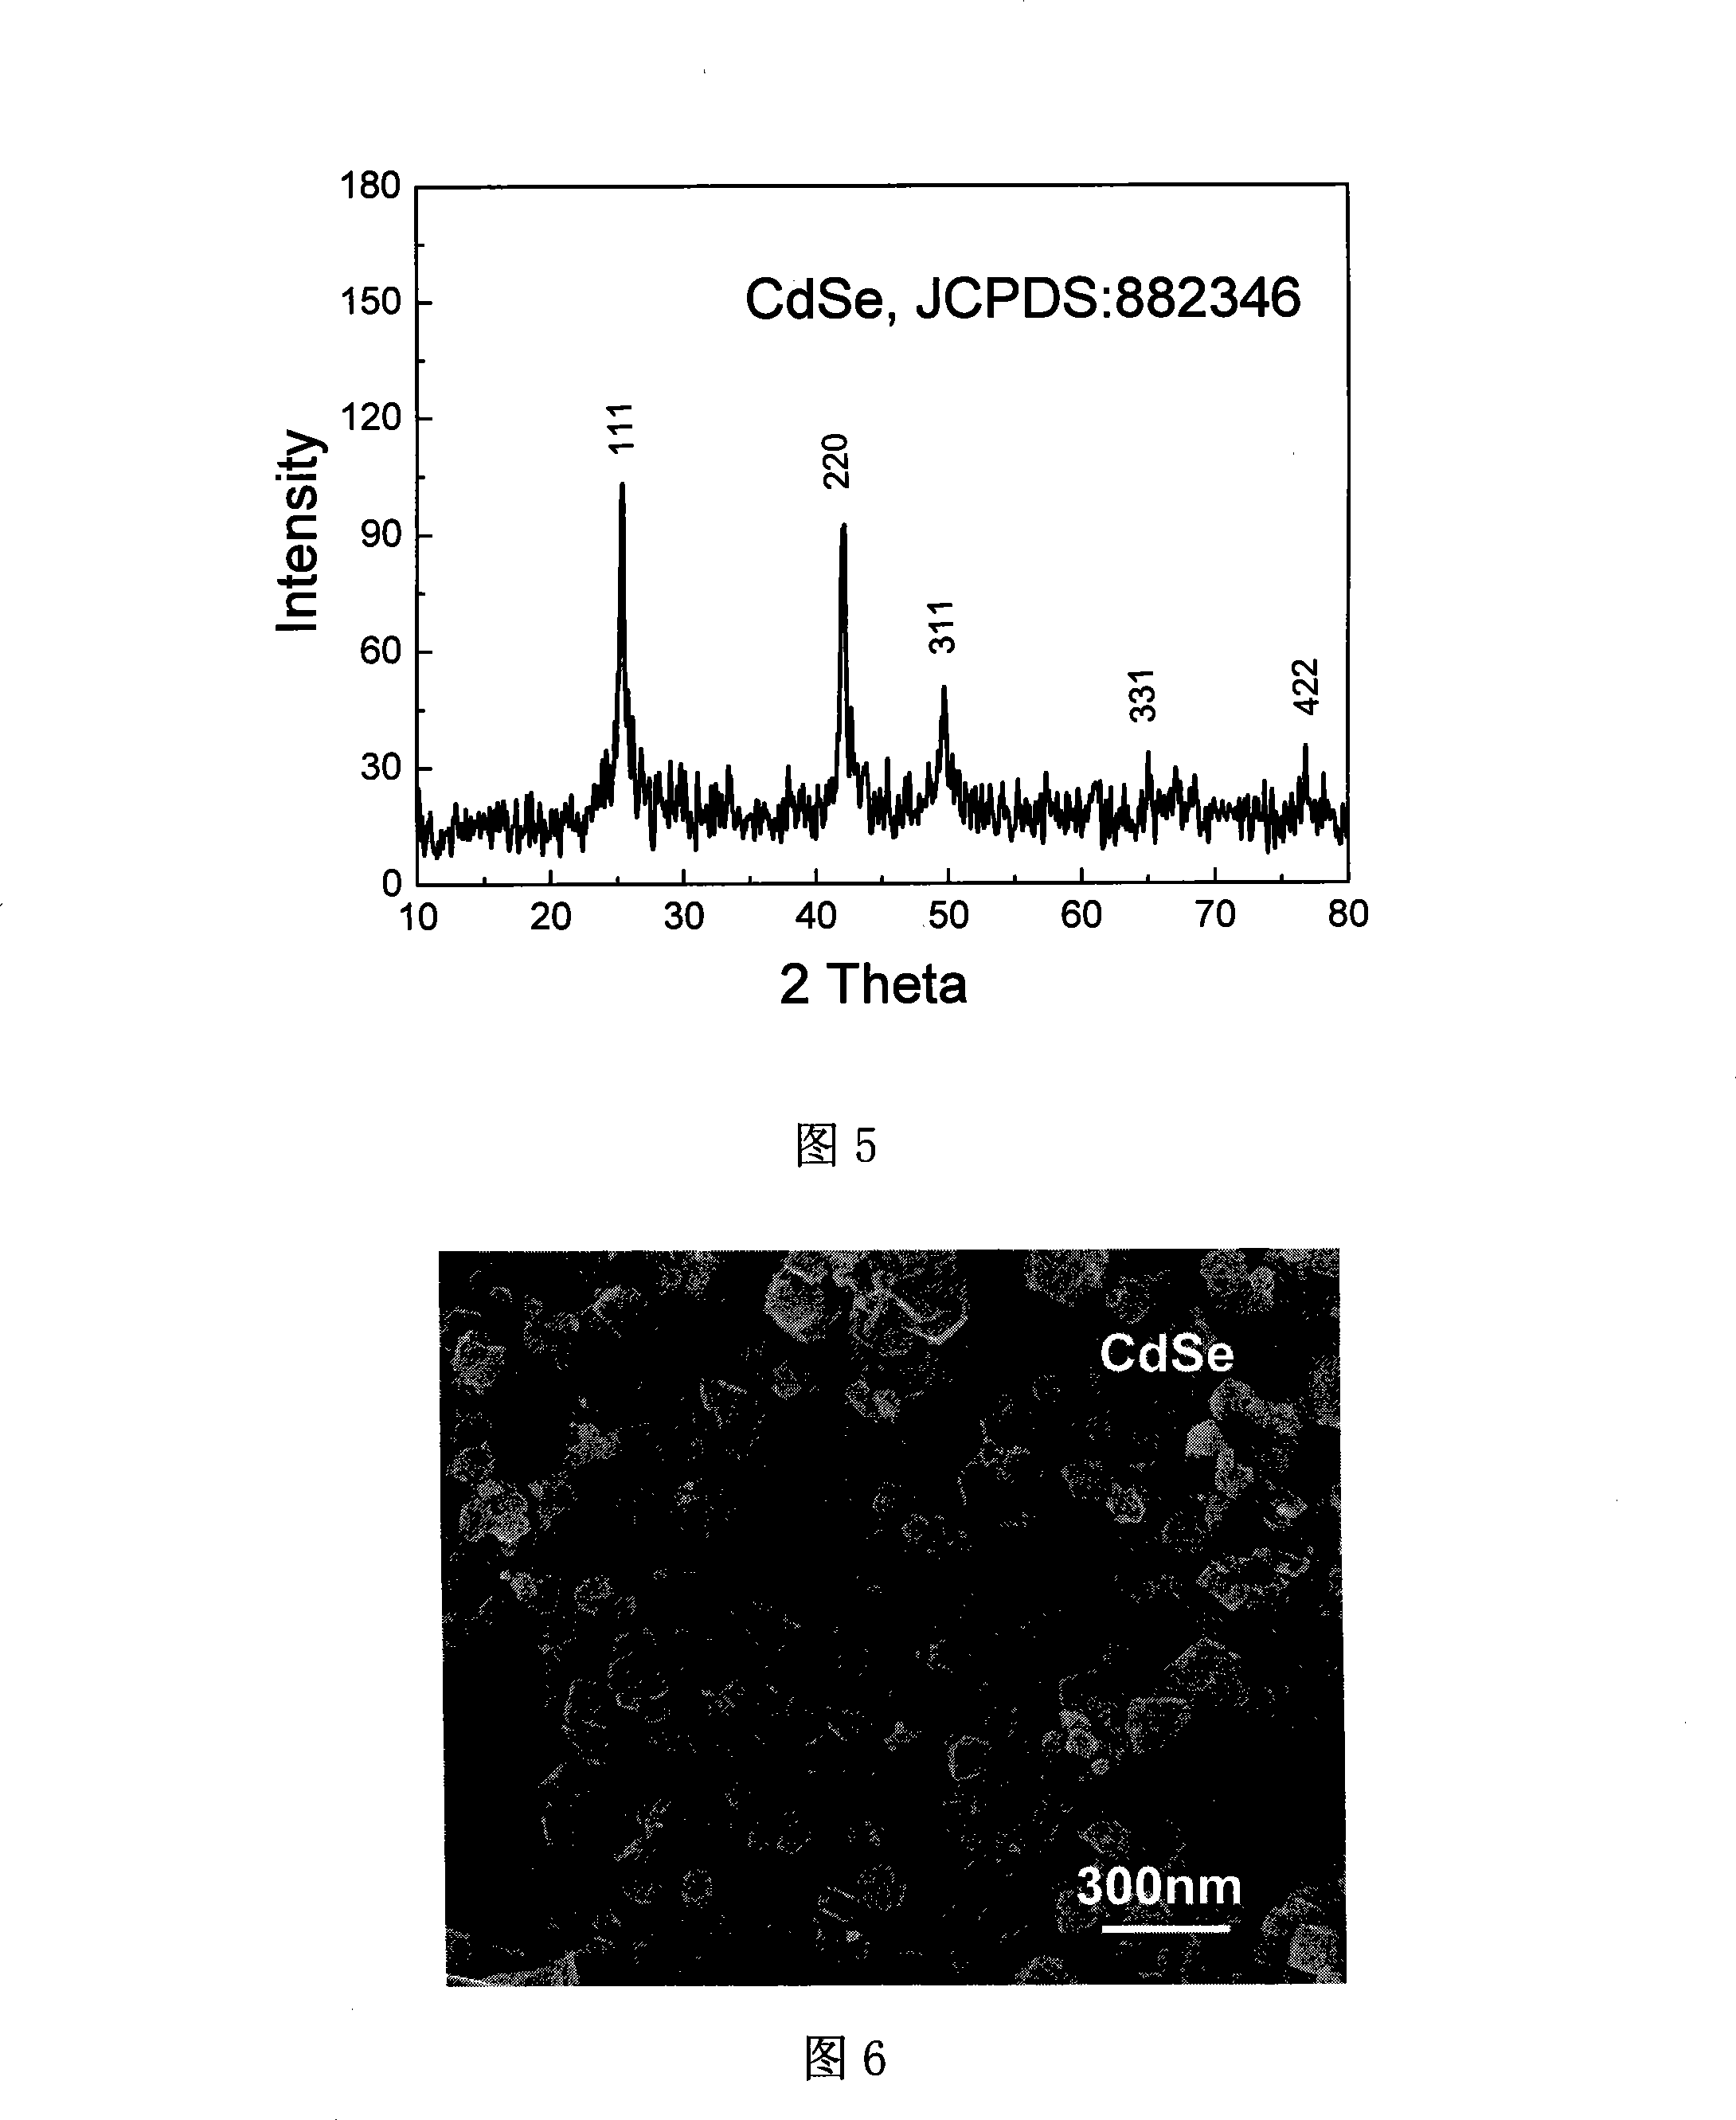 Method for producing selenide and telluride nano-material with composite base metal hydroxide solvent